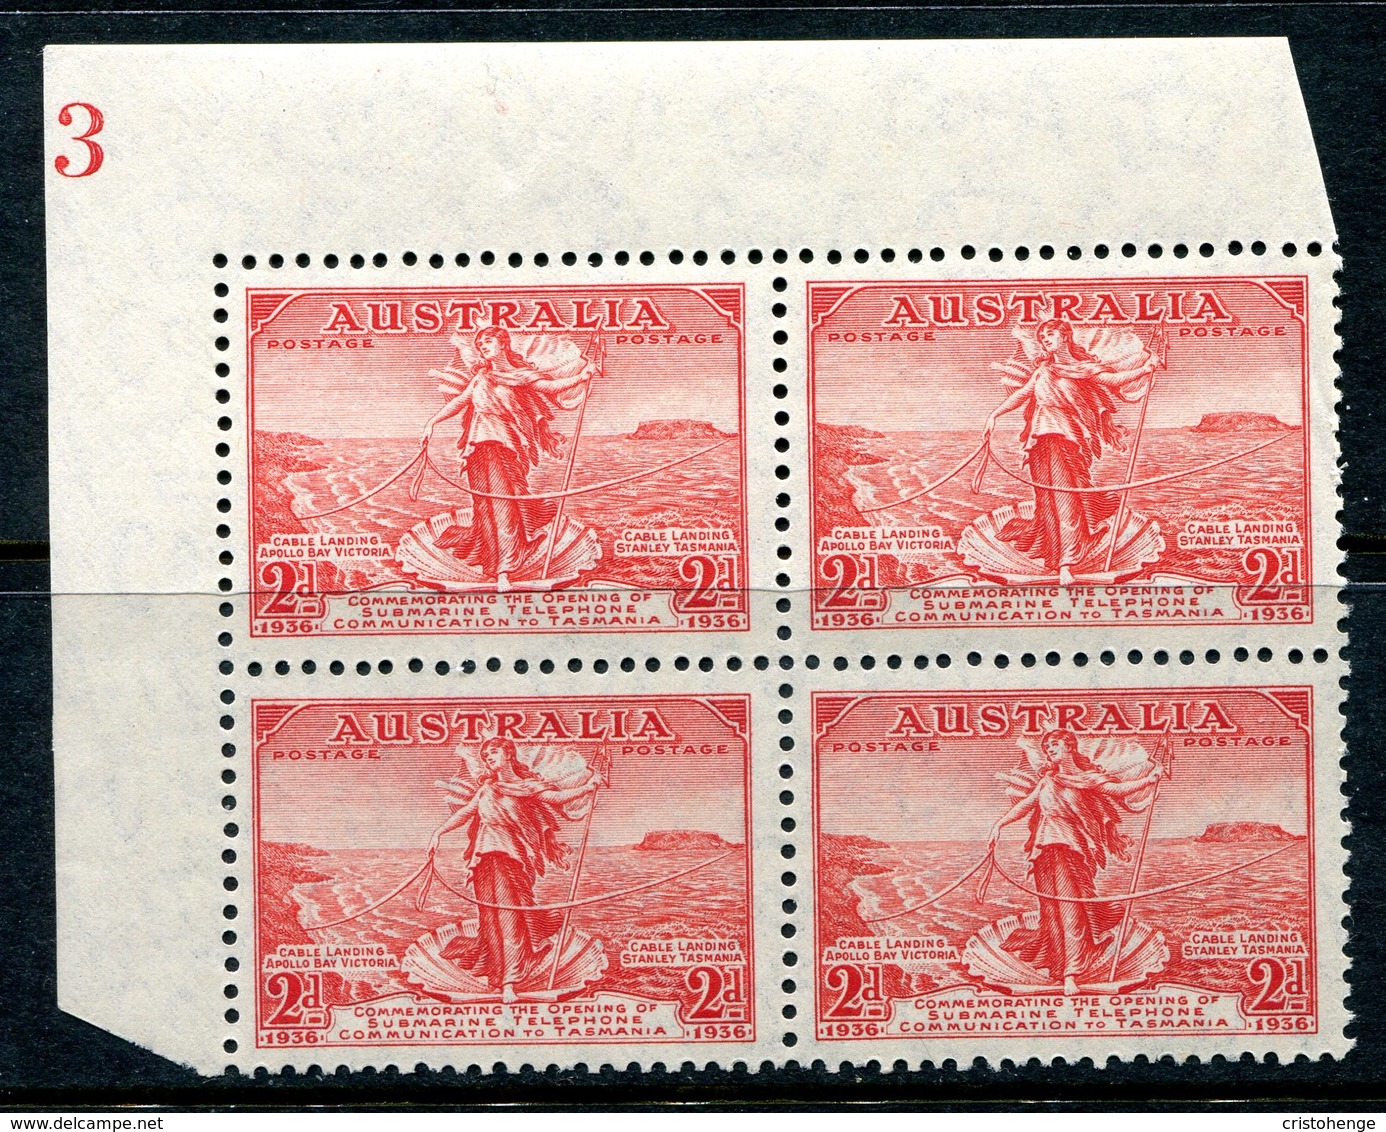 Australia 1936 Opening Of Submarine Telephone Link To Tasmania - 2d Scarlet Plate 3 Block Of 4 MNH (SG 159) - Mint Stamps